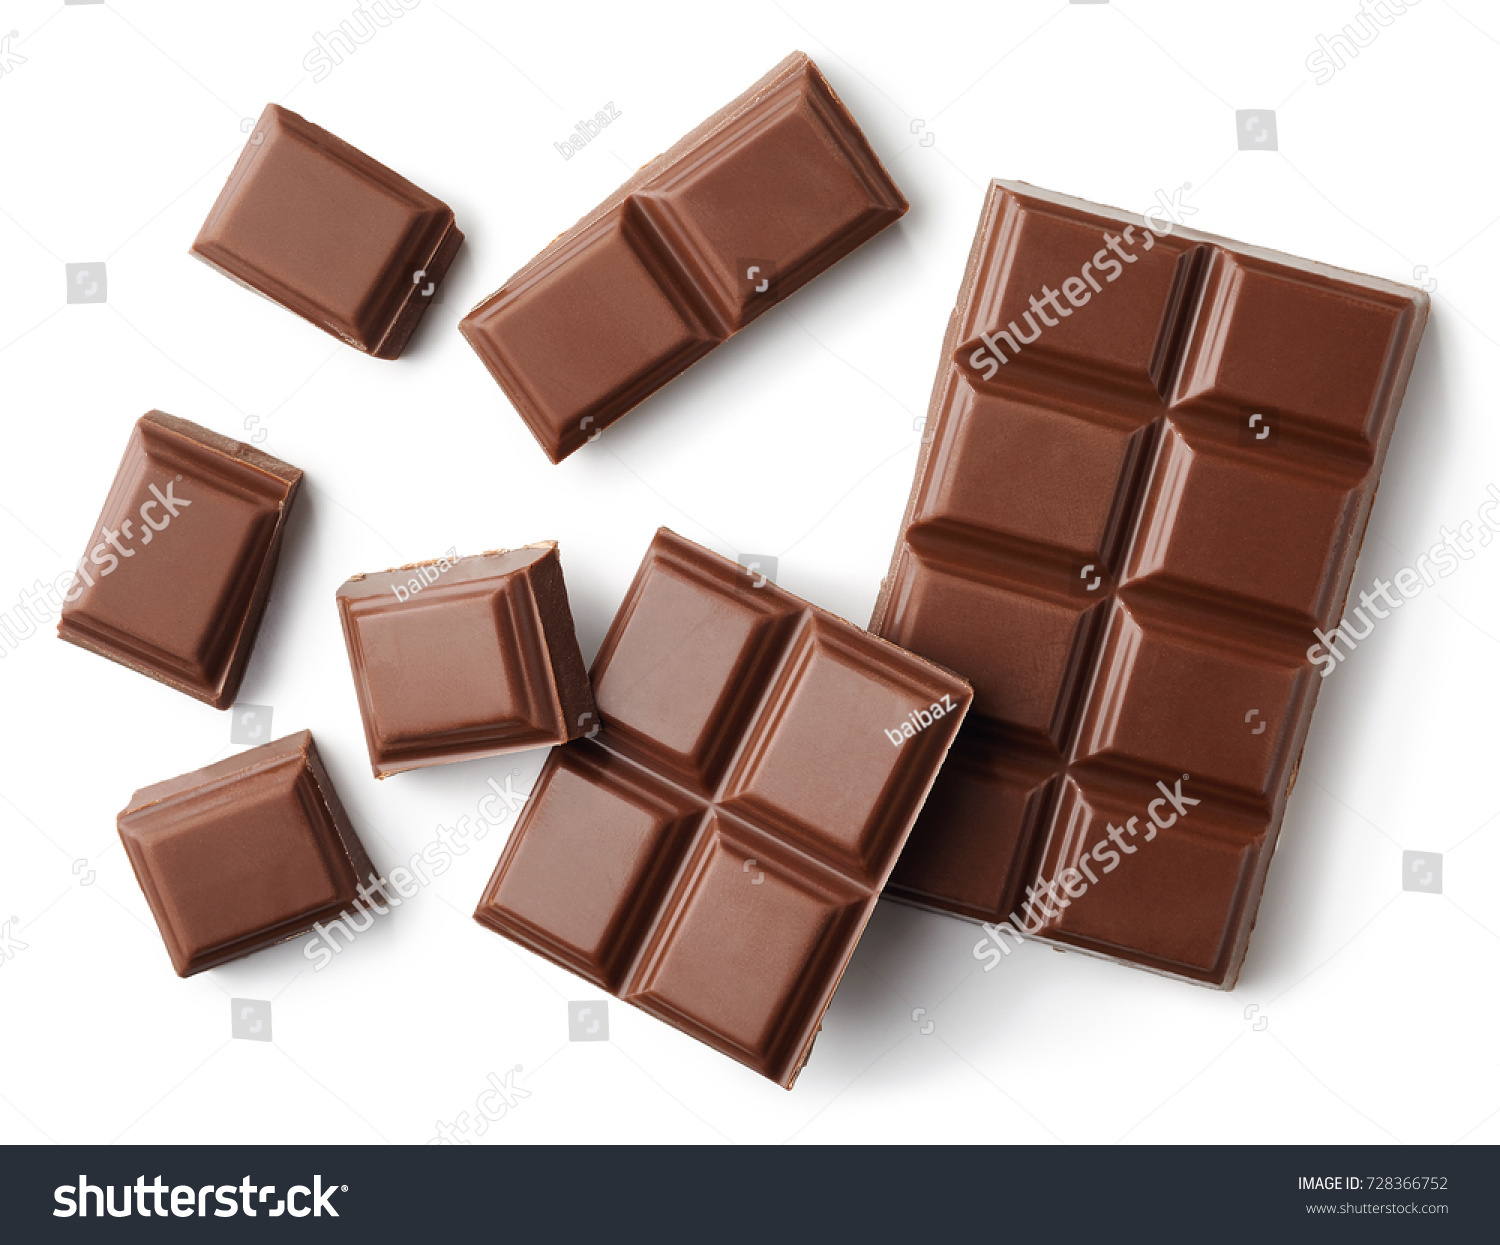 Milk chocolate pieces isolated on white background from top view #728366752